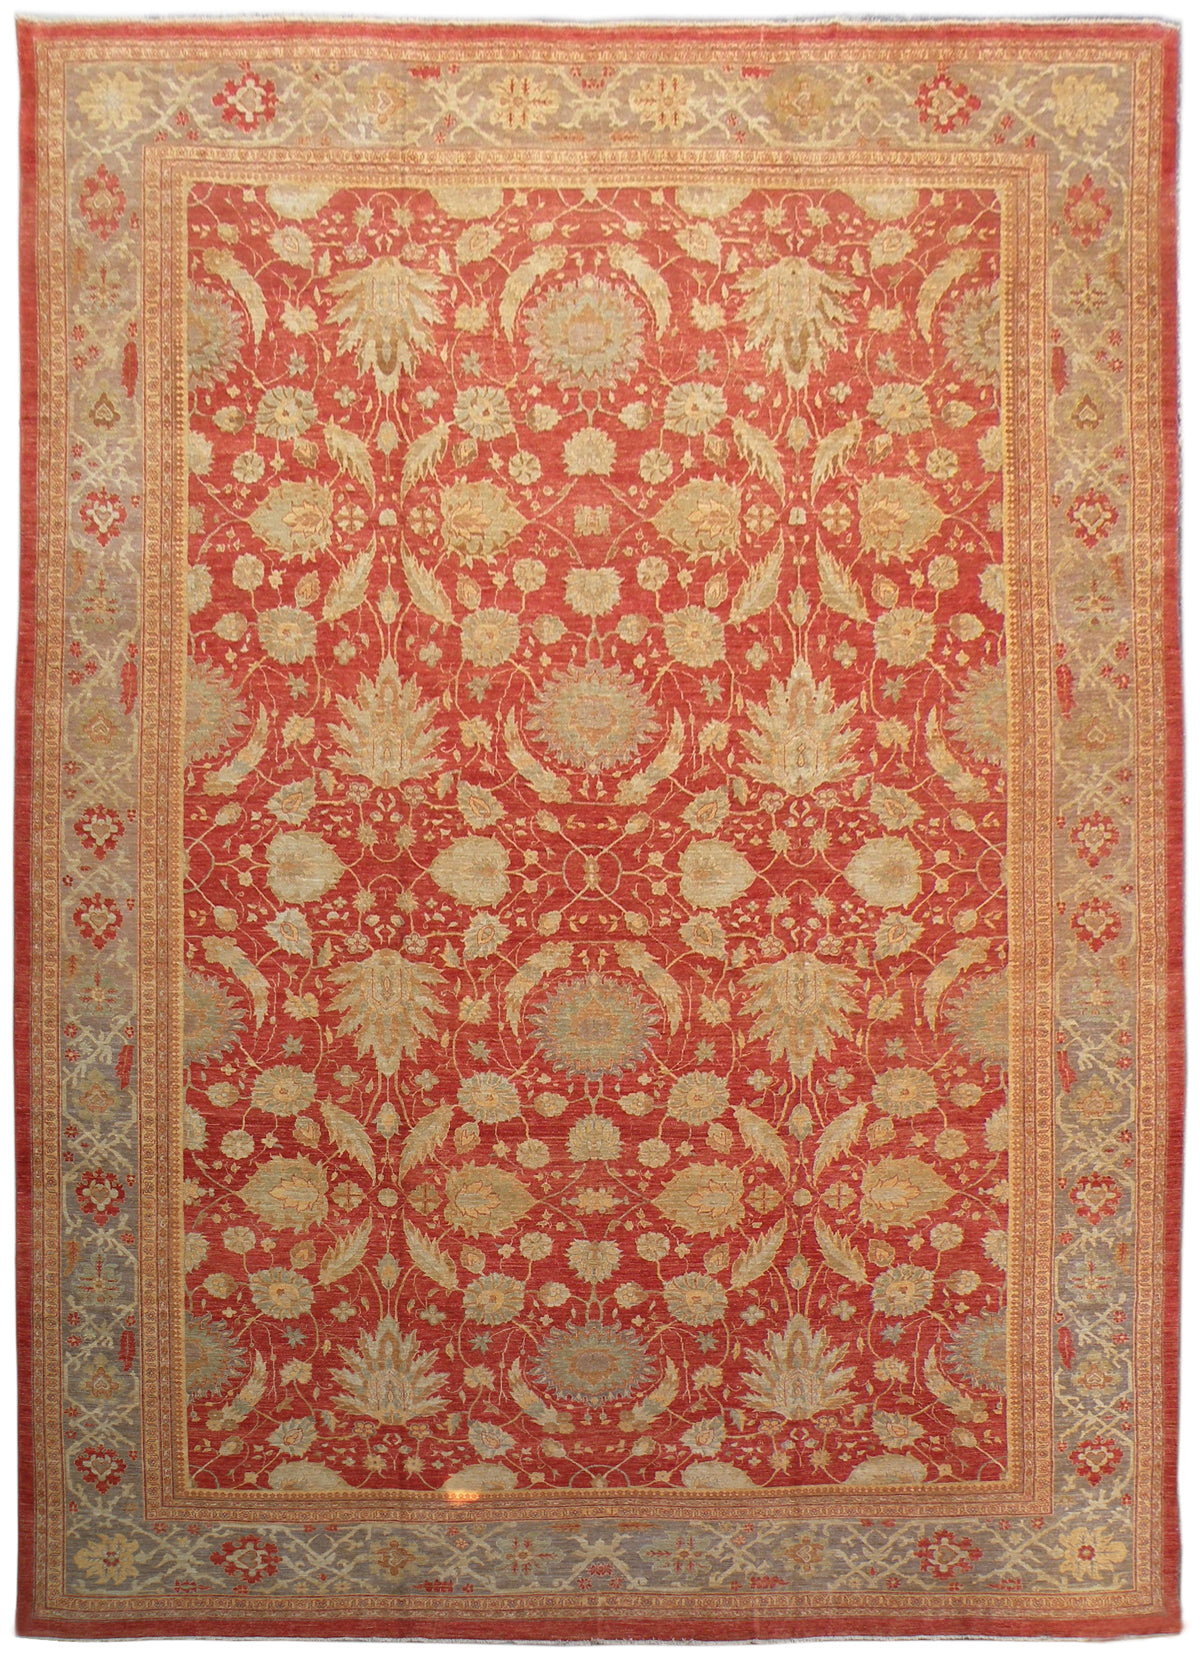 16'x21' Large Floral Red Blue Gold Sultanabad Design Ariana Traditional Rug